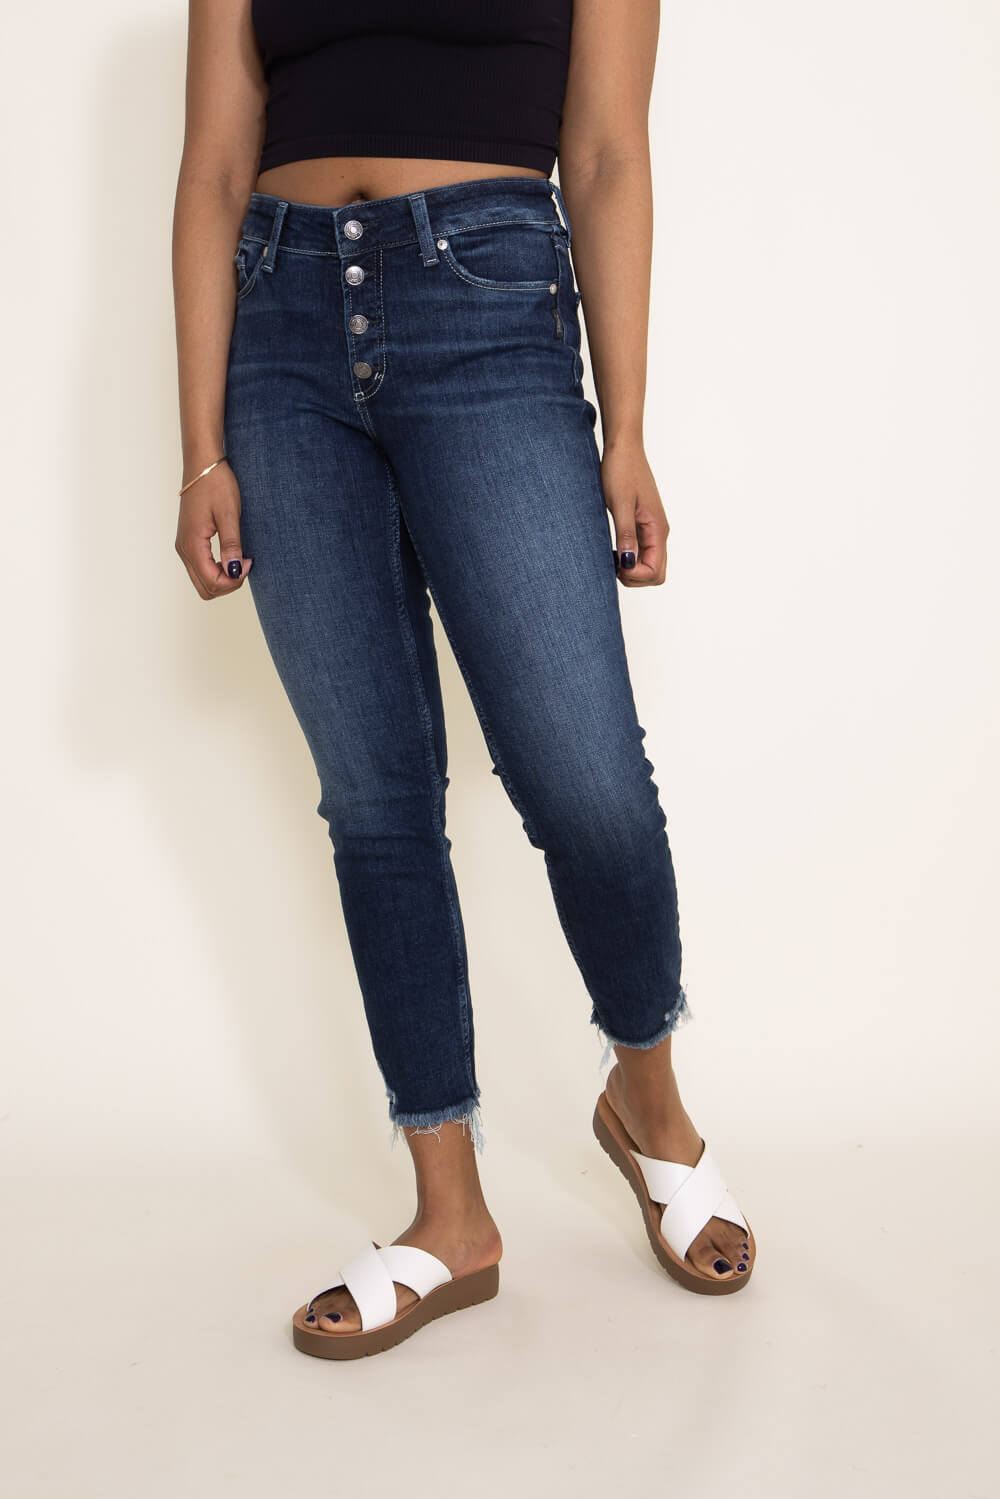 Buy Suki Mid Rise Skinny Crop Jeans for USD 88.00